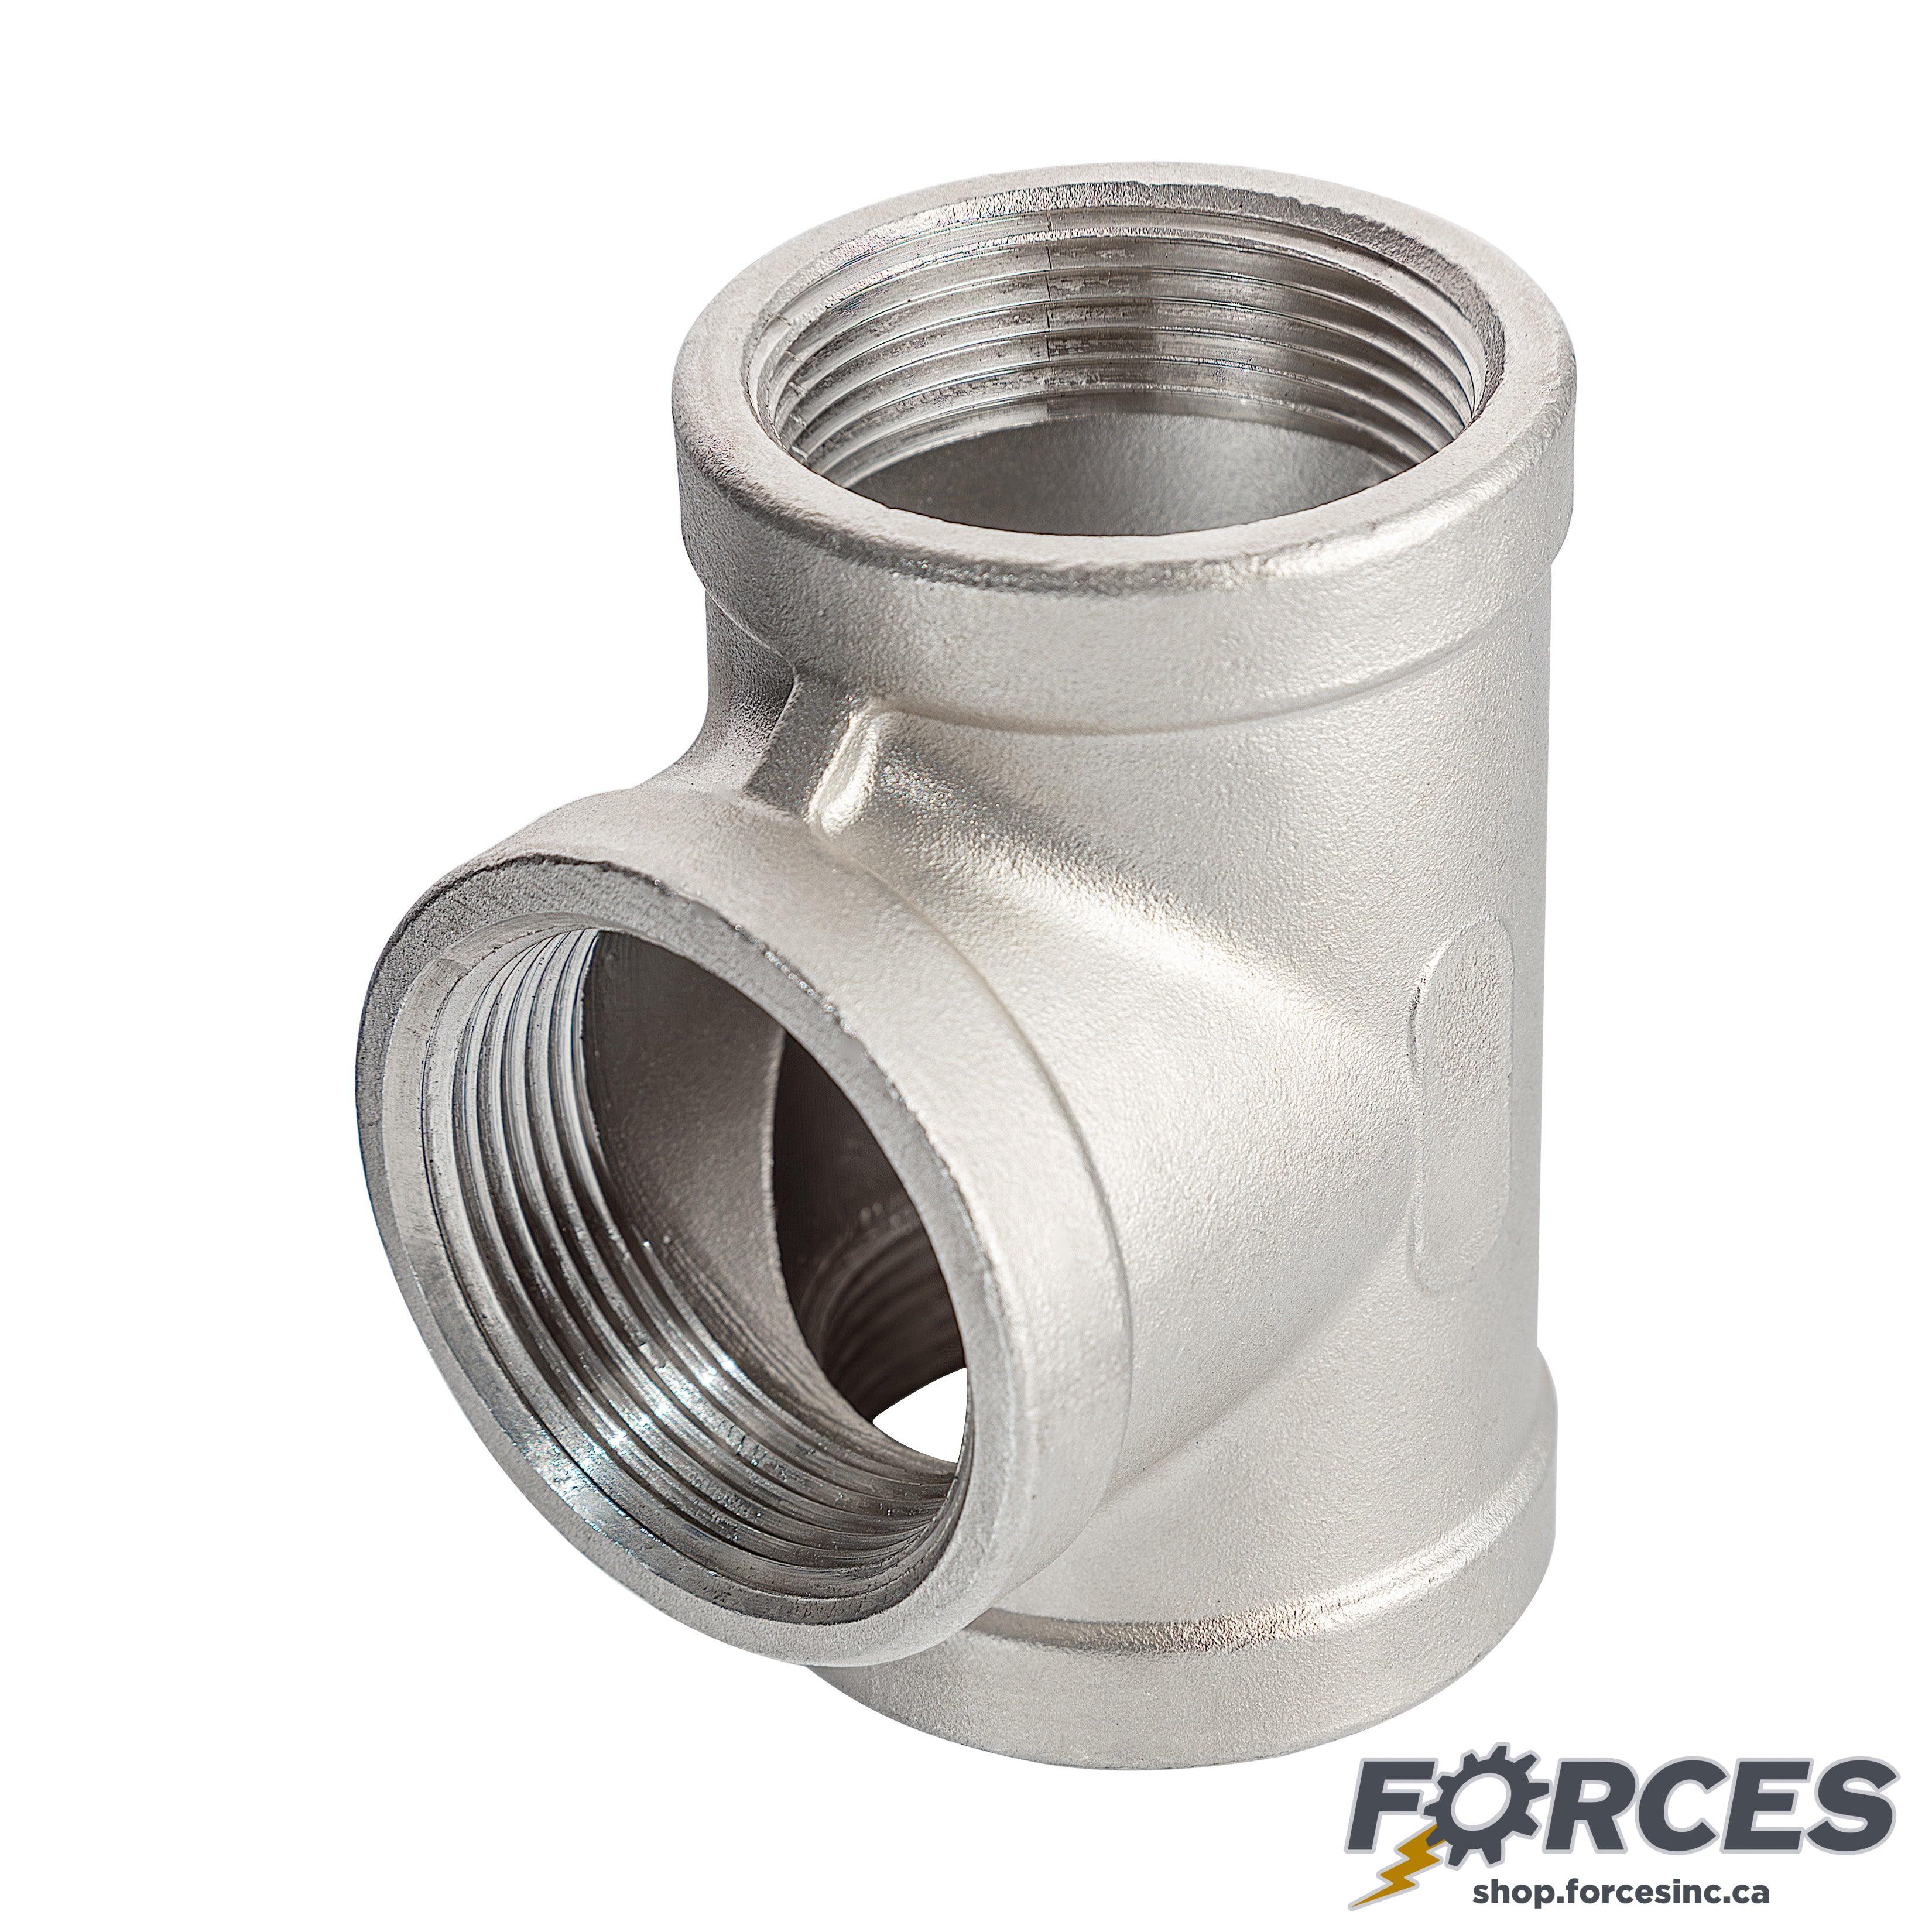 2" Tee NPT #150 - Stainless Steel 316 - Forces Inc